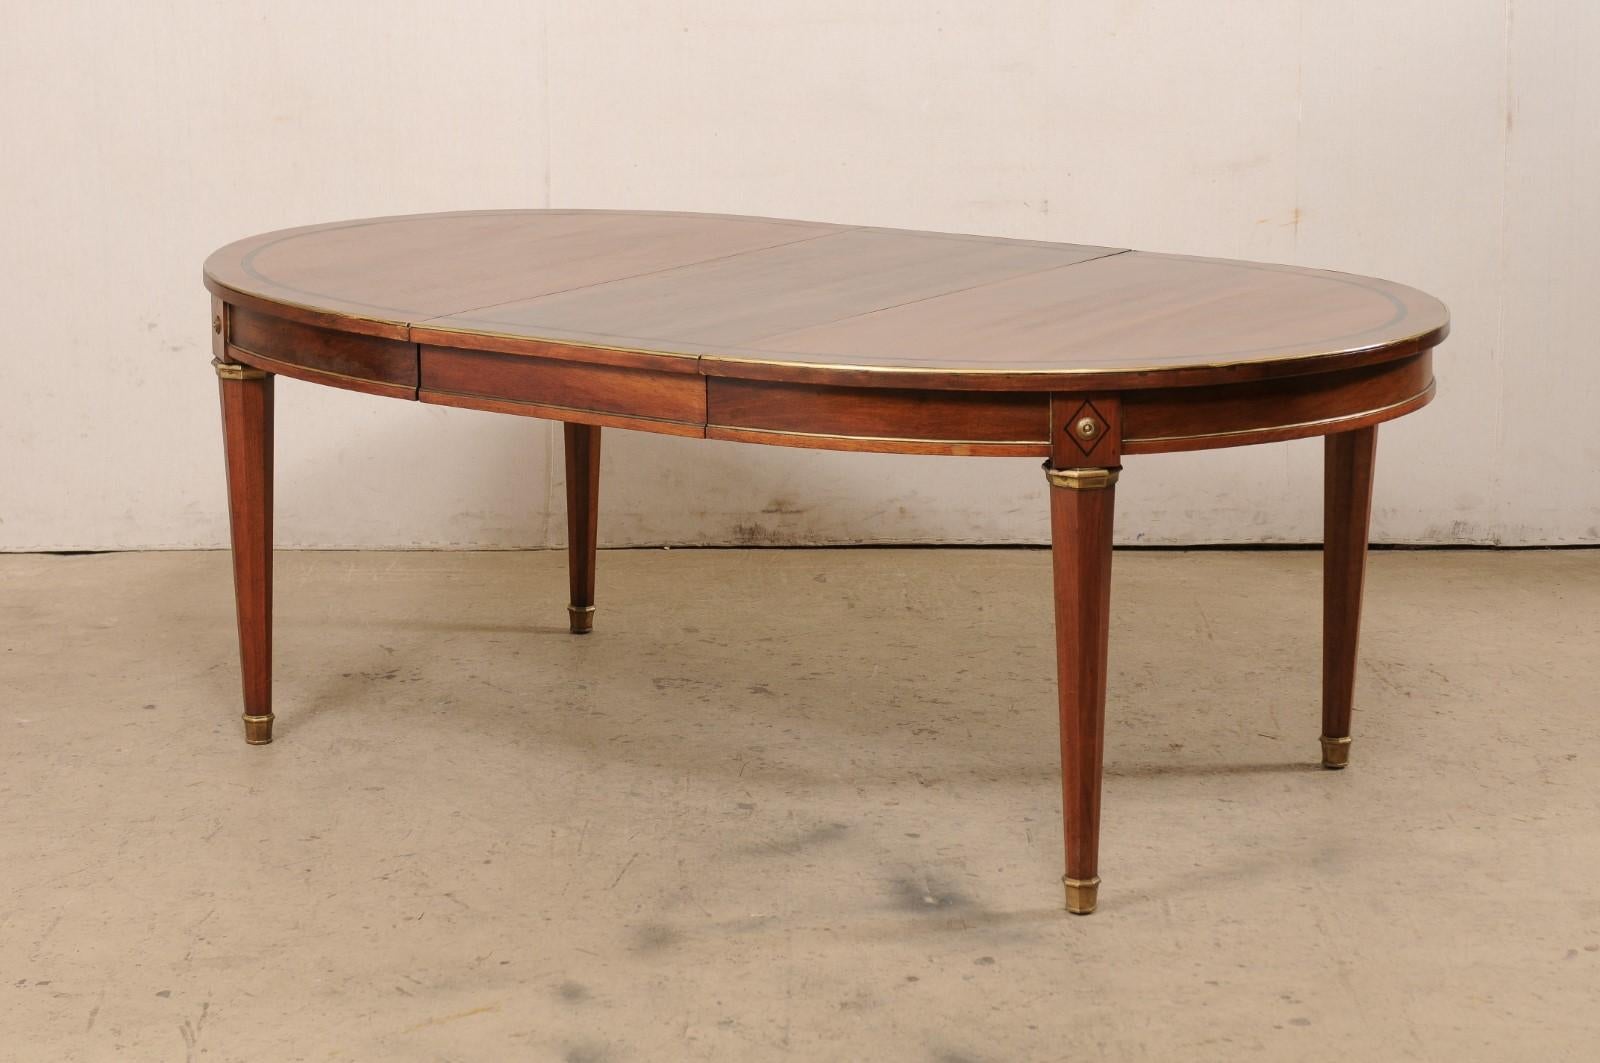 Wood French Neoclassic Style Oval Table with Brass Trim & Accents '1 Leaf Extension' For Sale